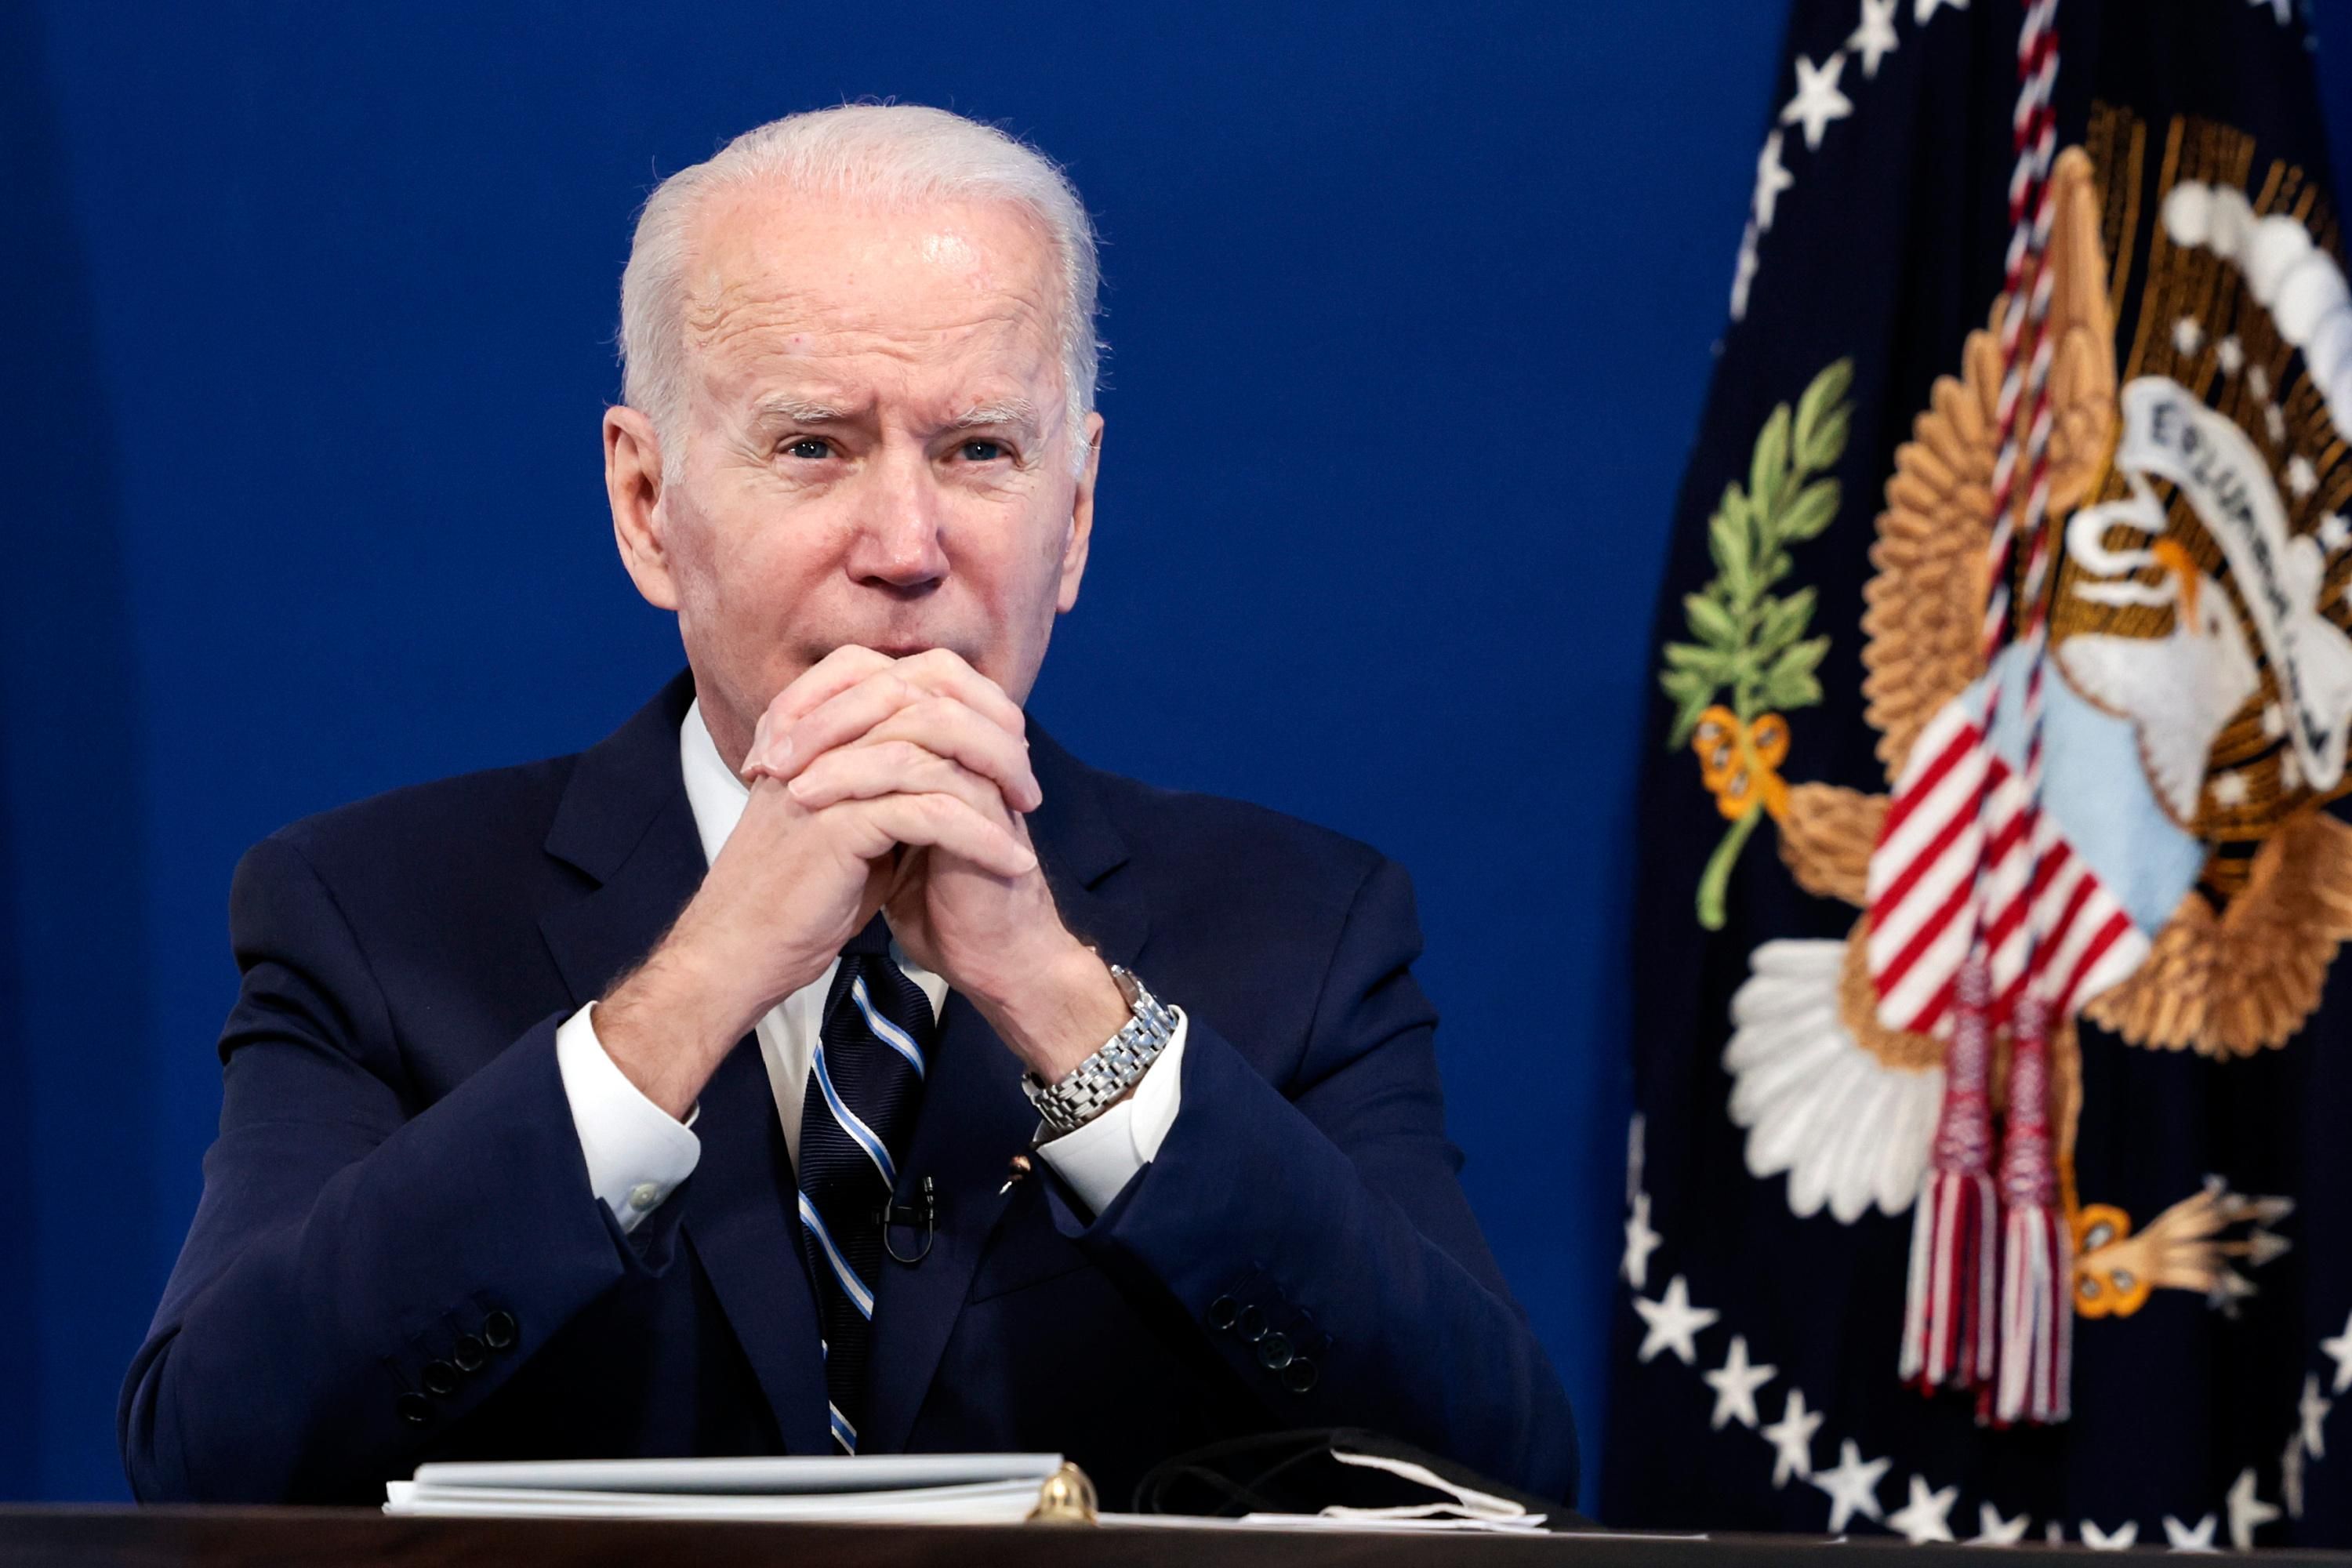 President Joe Biden appears at an event on the White House's Covid-19 response